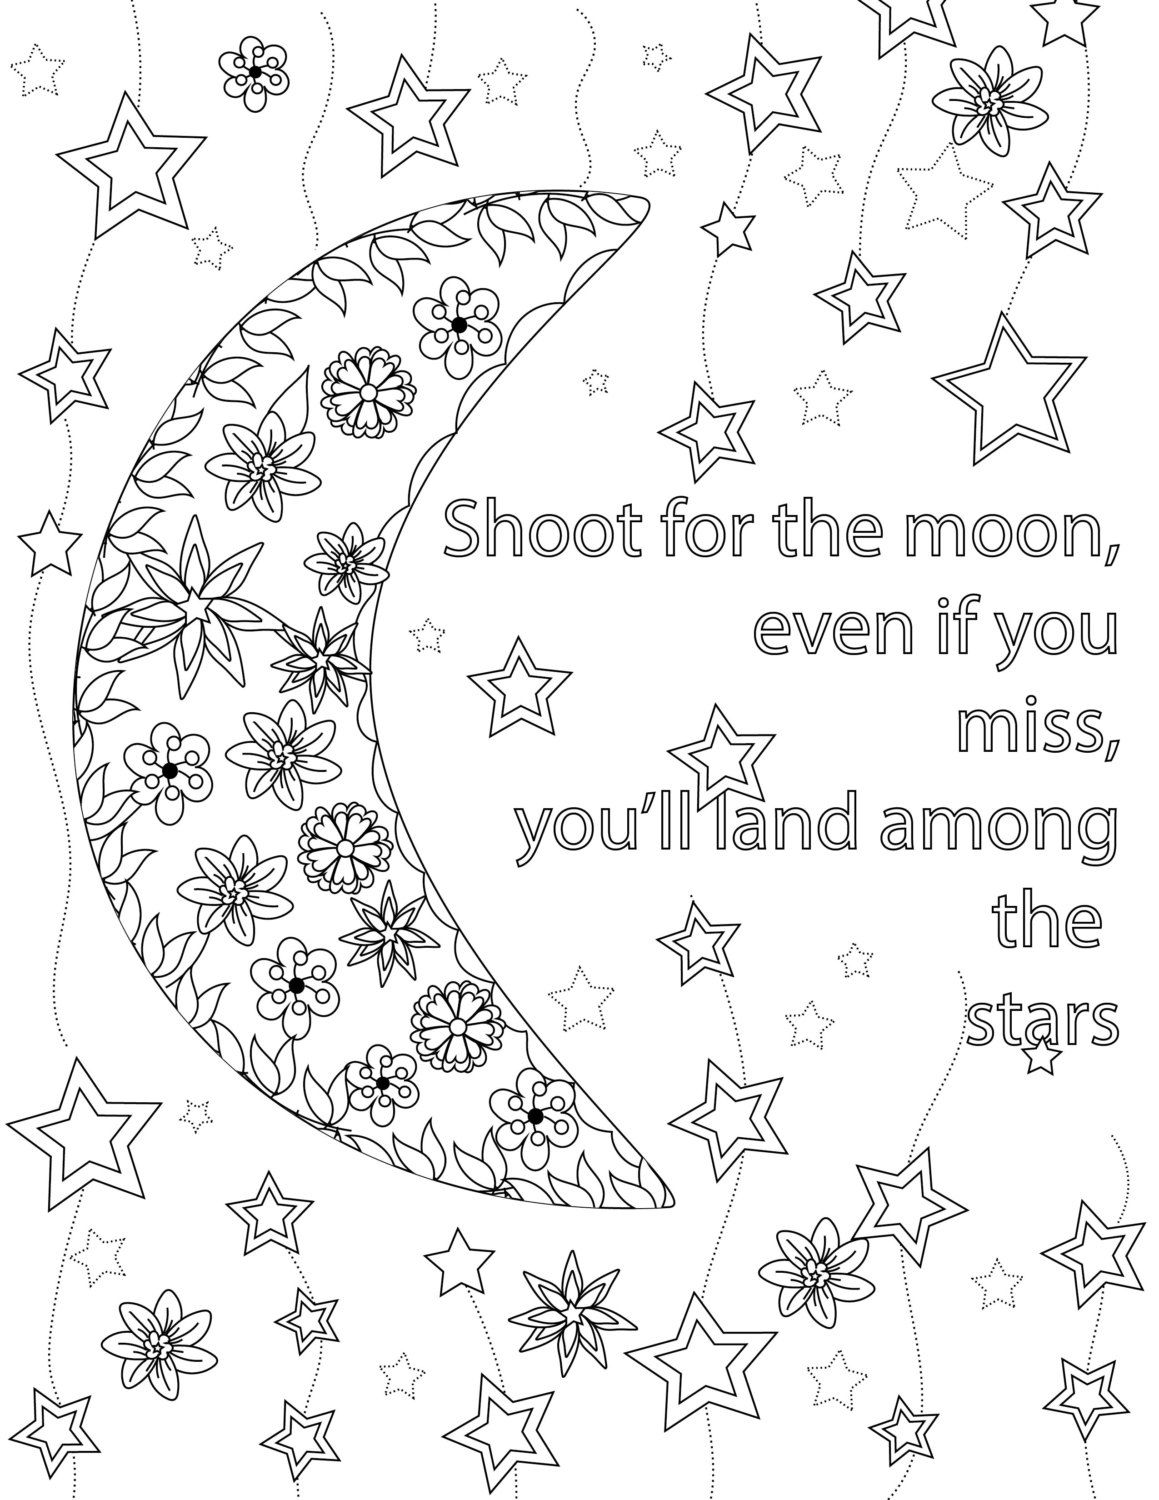 Quote Coloring Pages for Adults and Teens   Best Coloring Pages ...